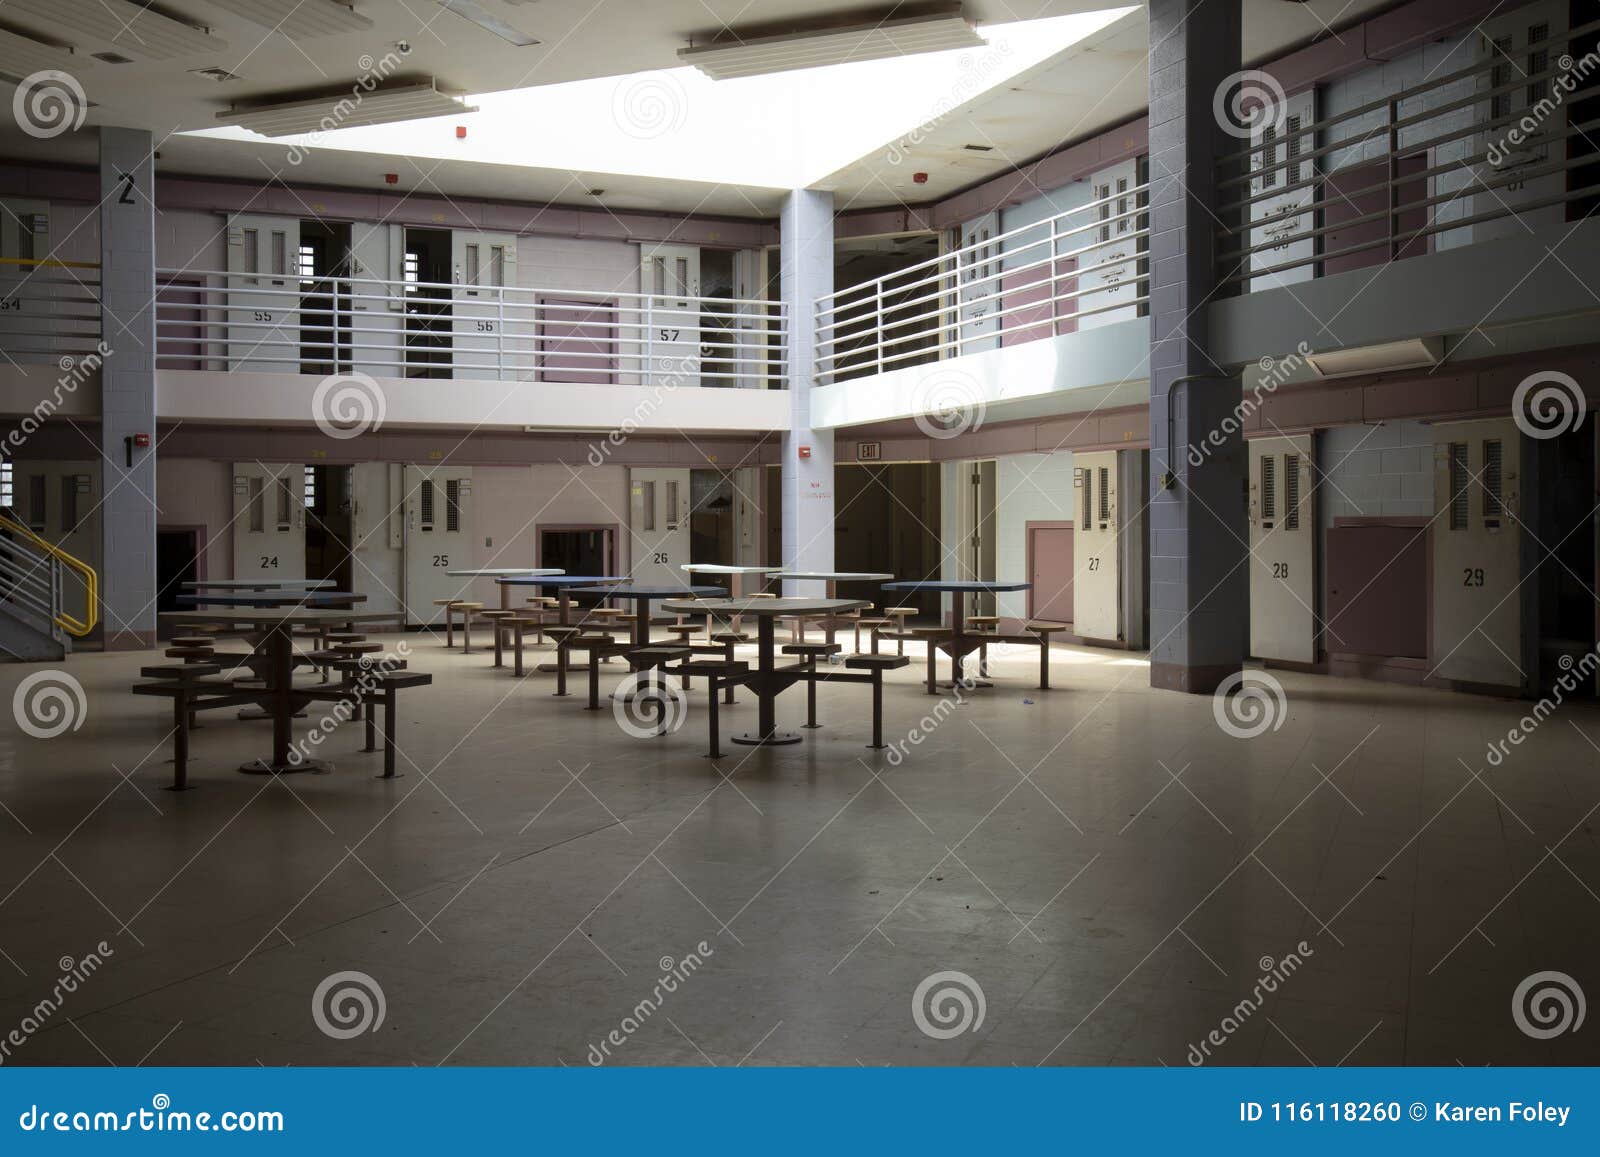 abandoned jail common room in cell block